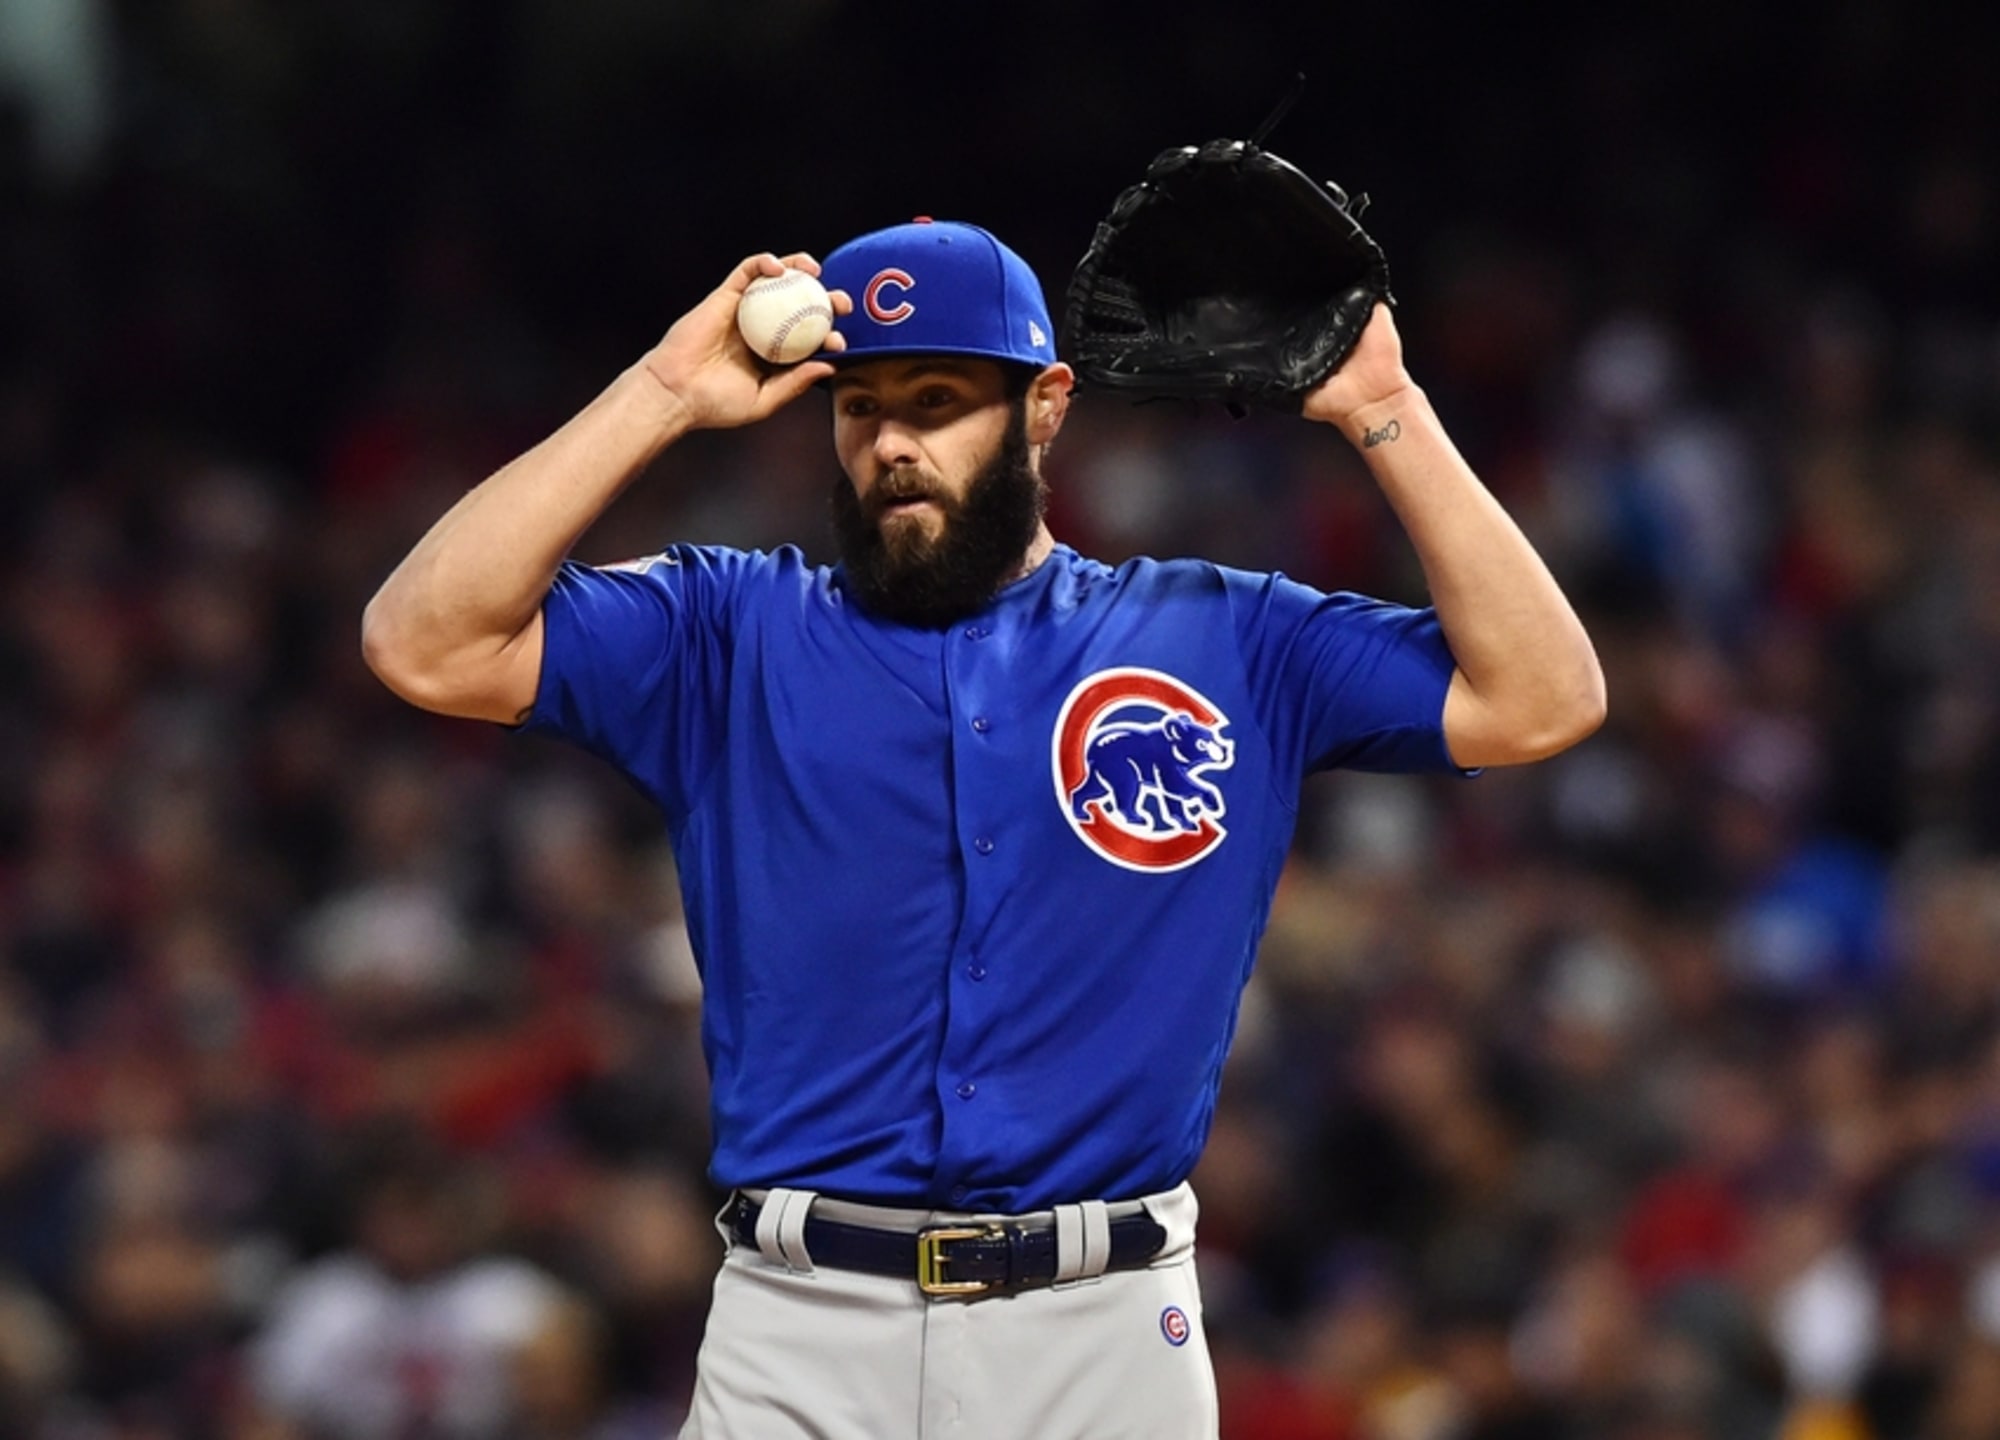 Cubs' Jake Arrieta sure looks done, but he doesn't see it